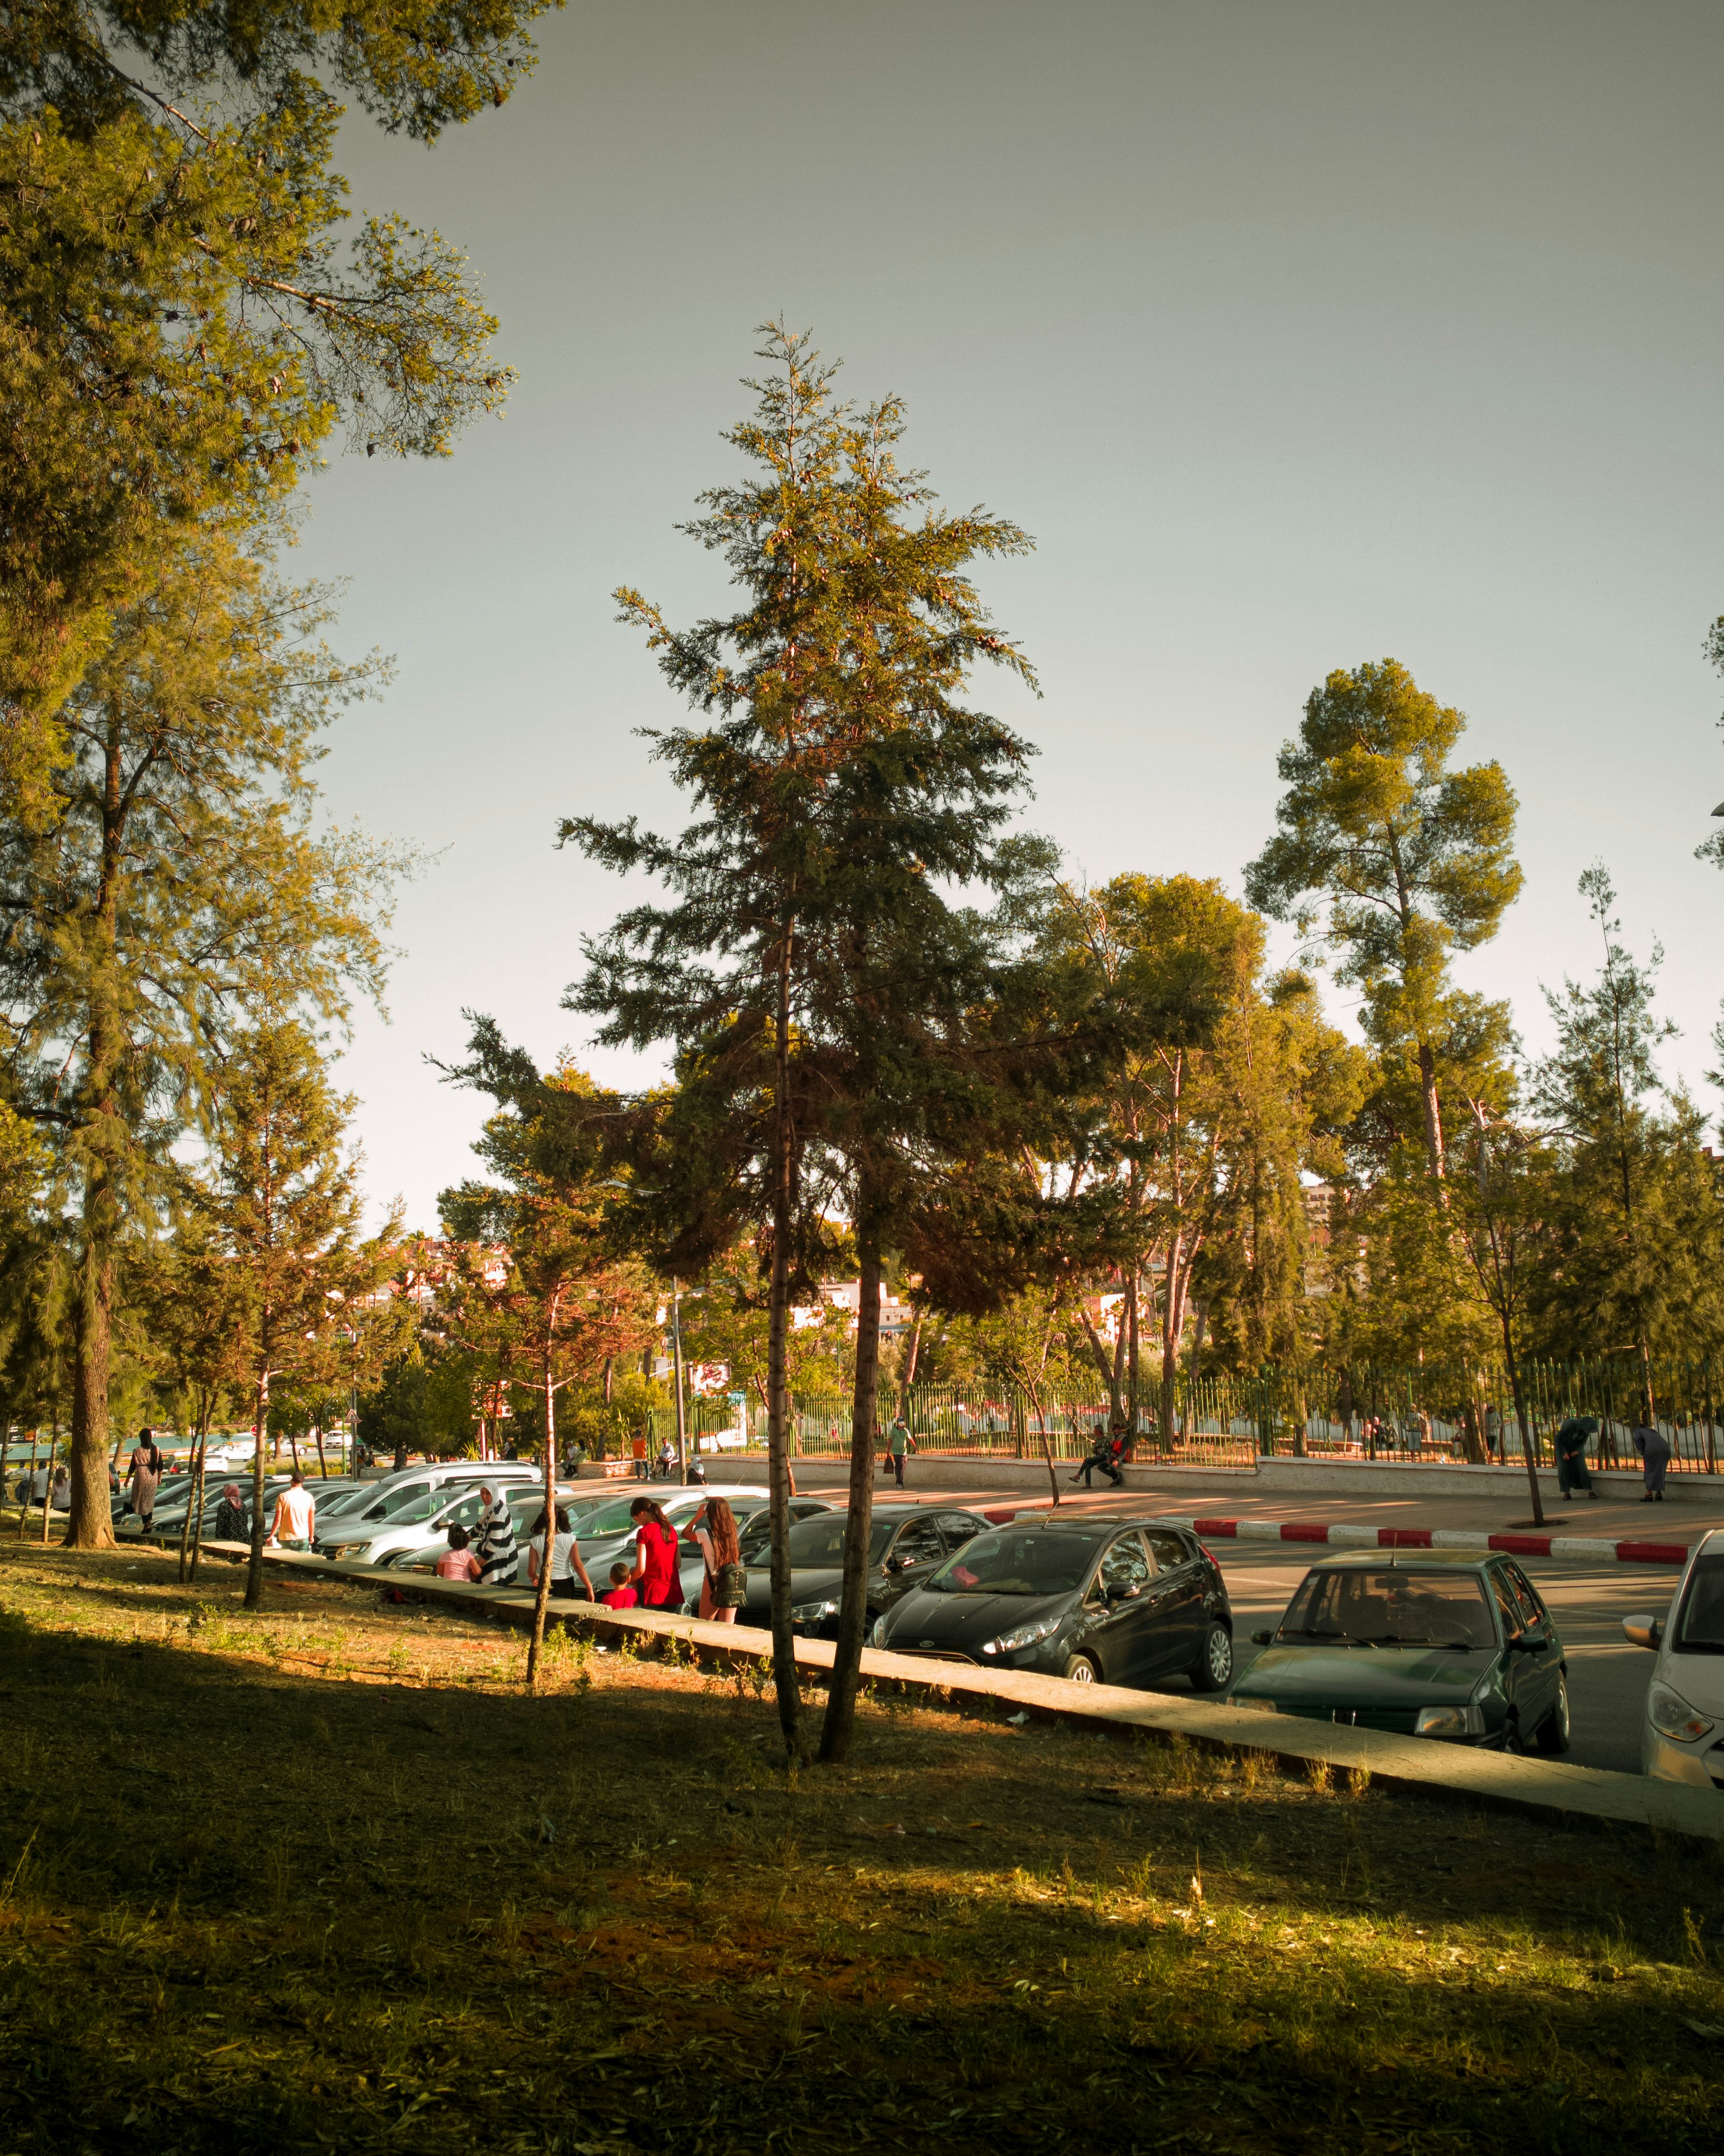 cars parked on parking lot near trees during daytime